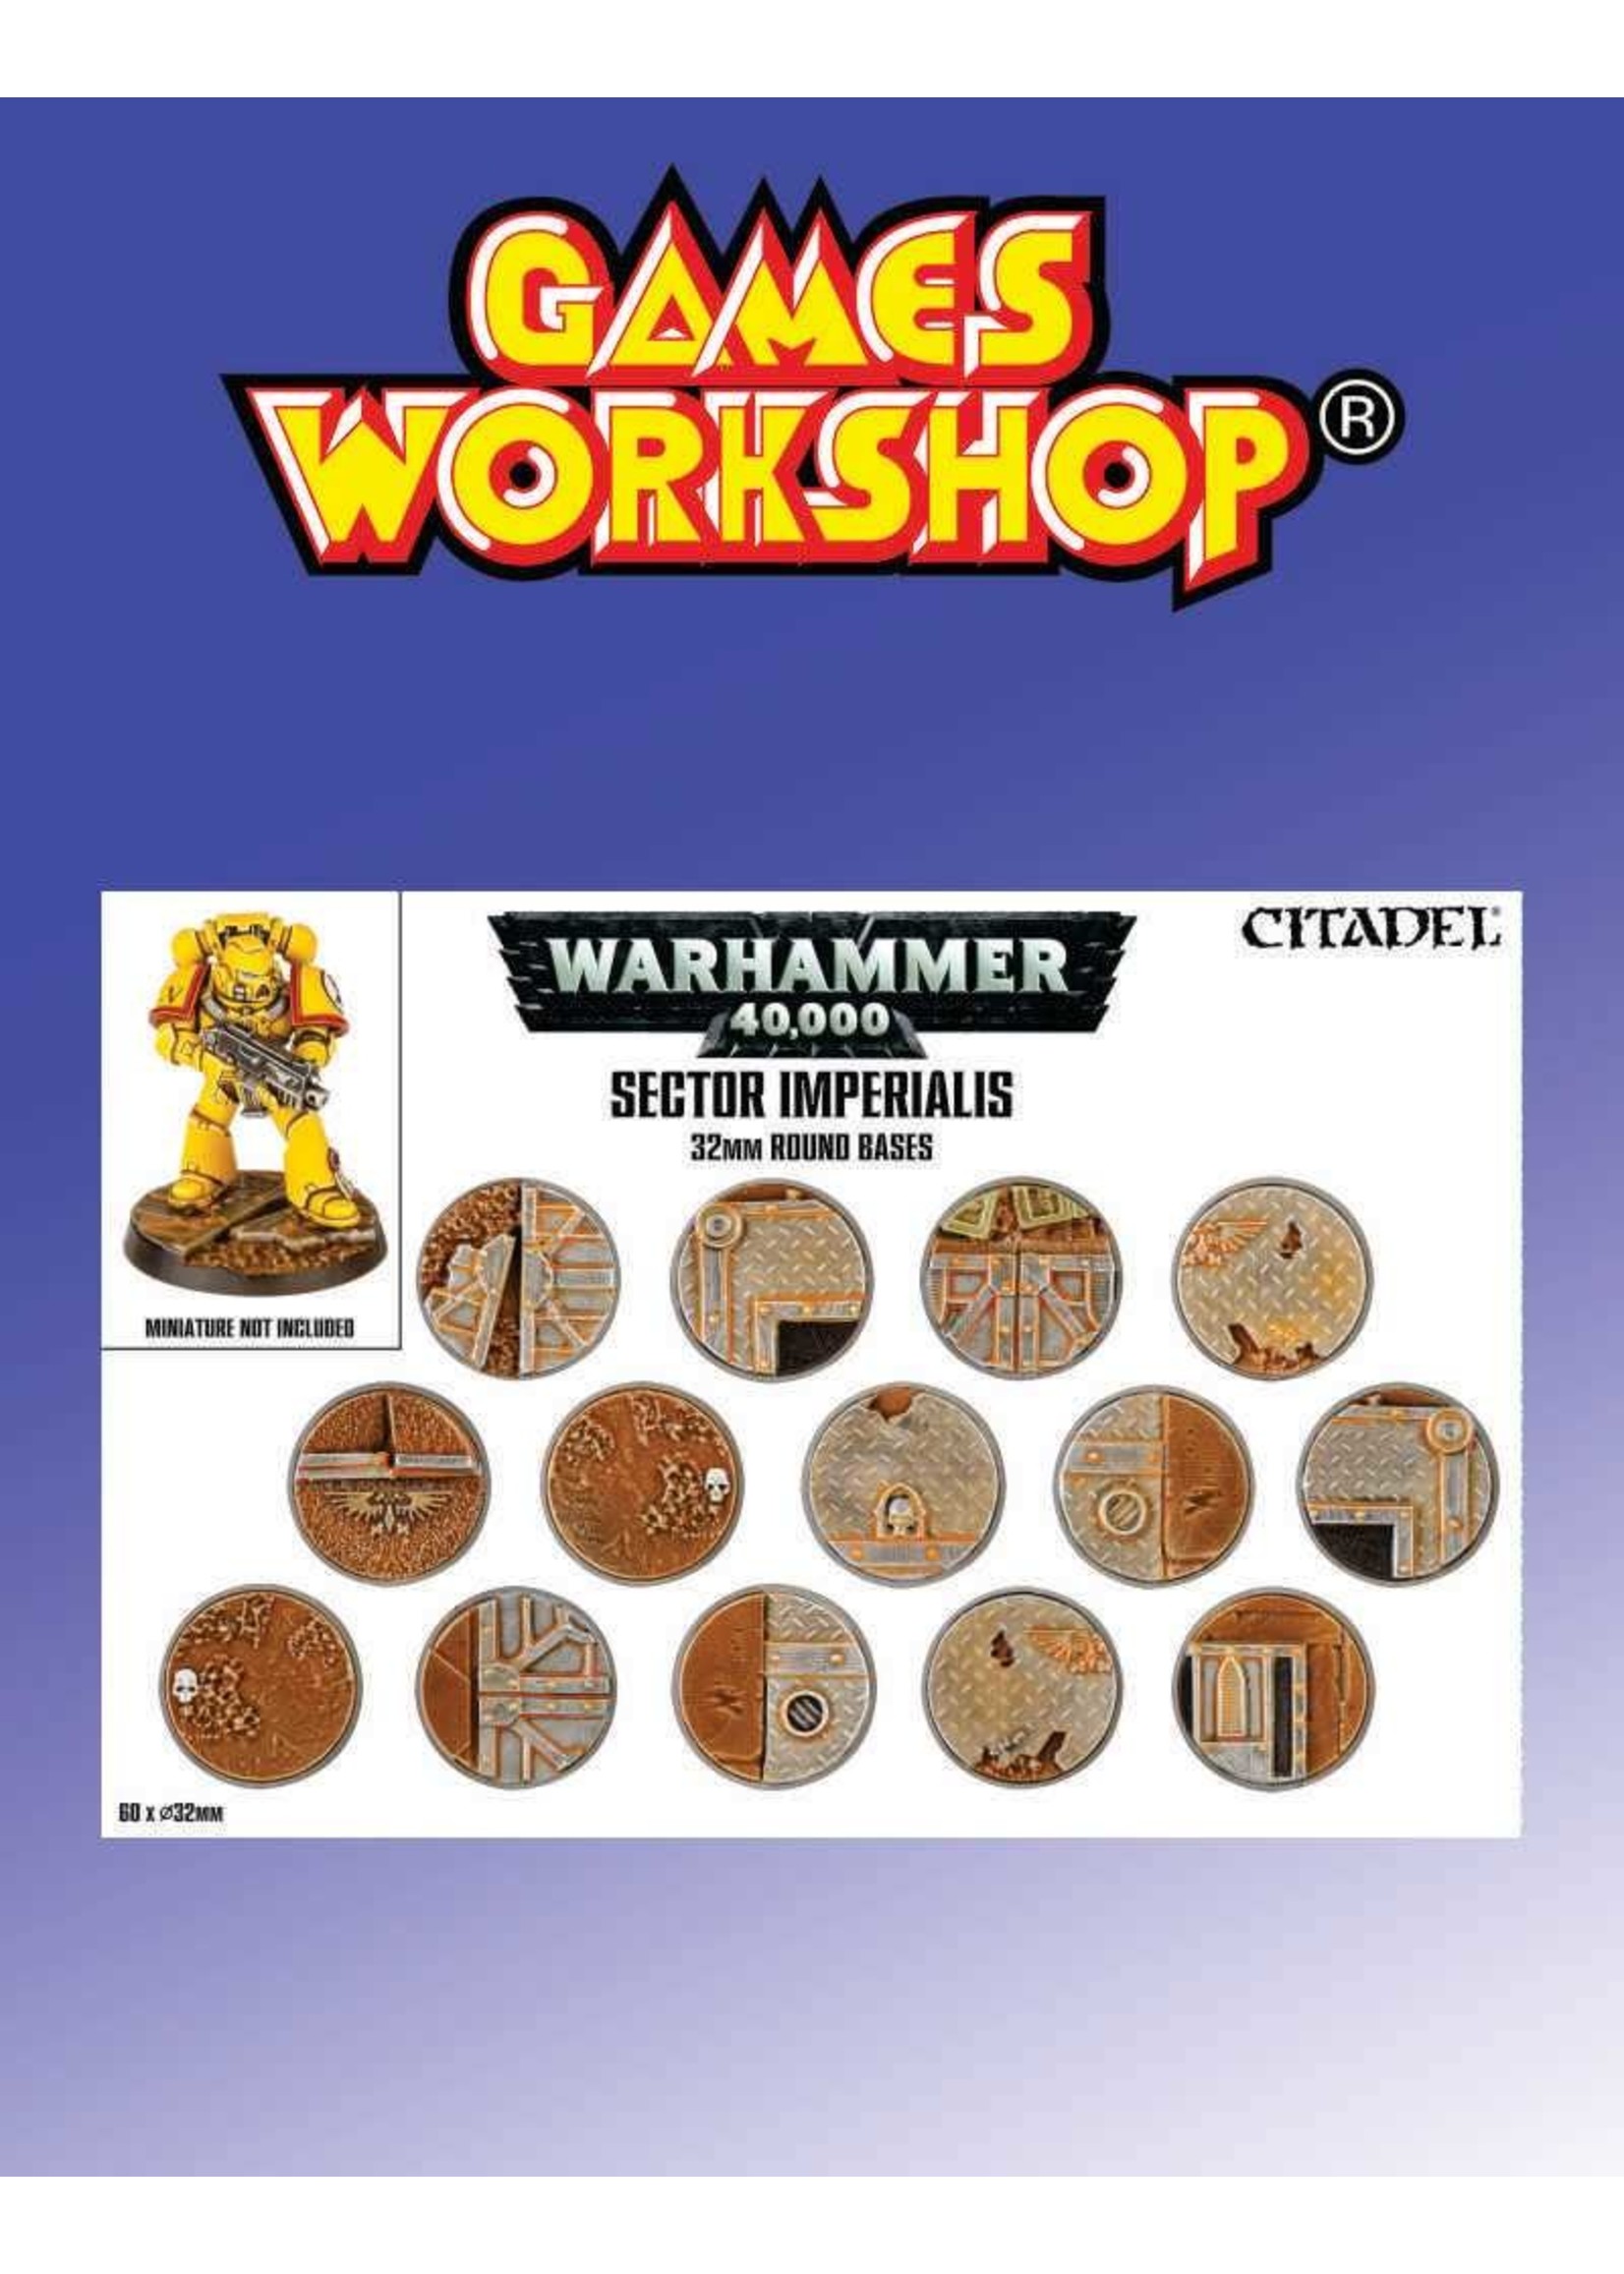 Games Workshop Sector Imperialis 32mm round bases